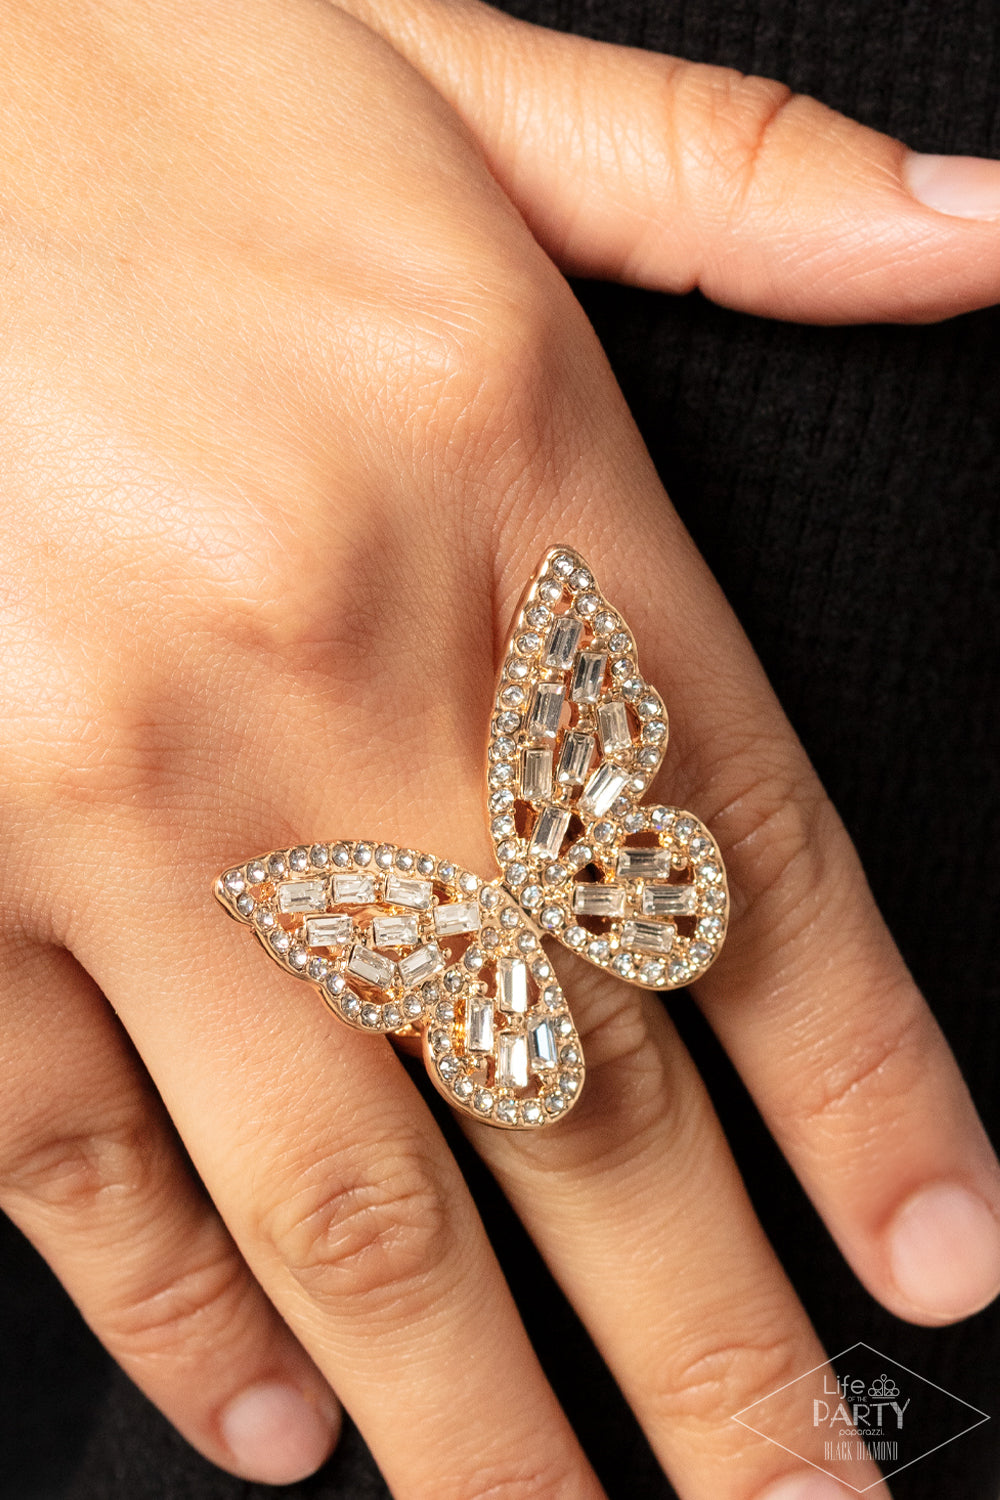 Dainty white emerald cut rhinestones are sprinkled across the golden wings of a butterfly that is encrusted in glassy white rhinestones for a dramatically dazzling finish. Features a stretchy band for a flexible fit.